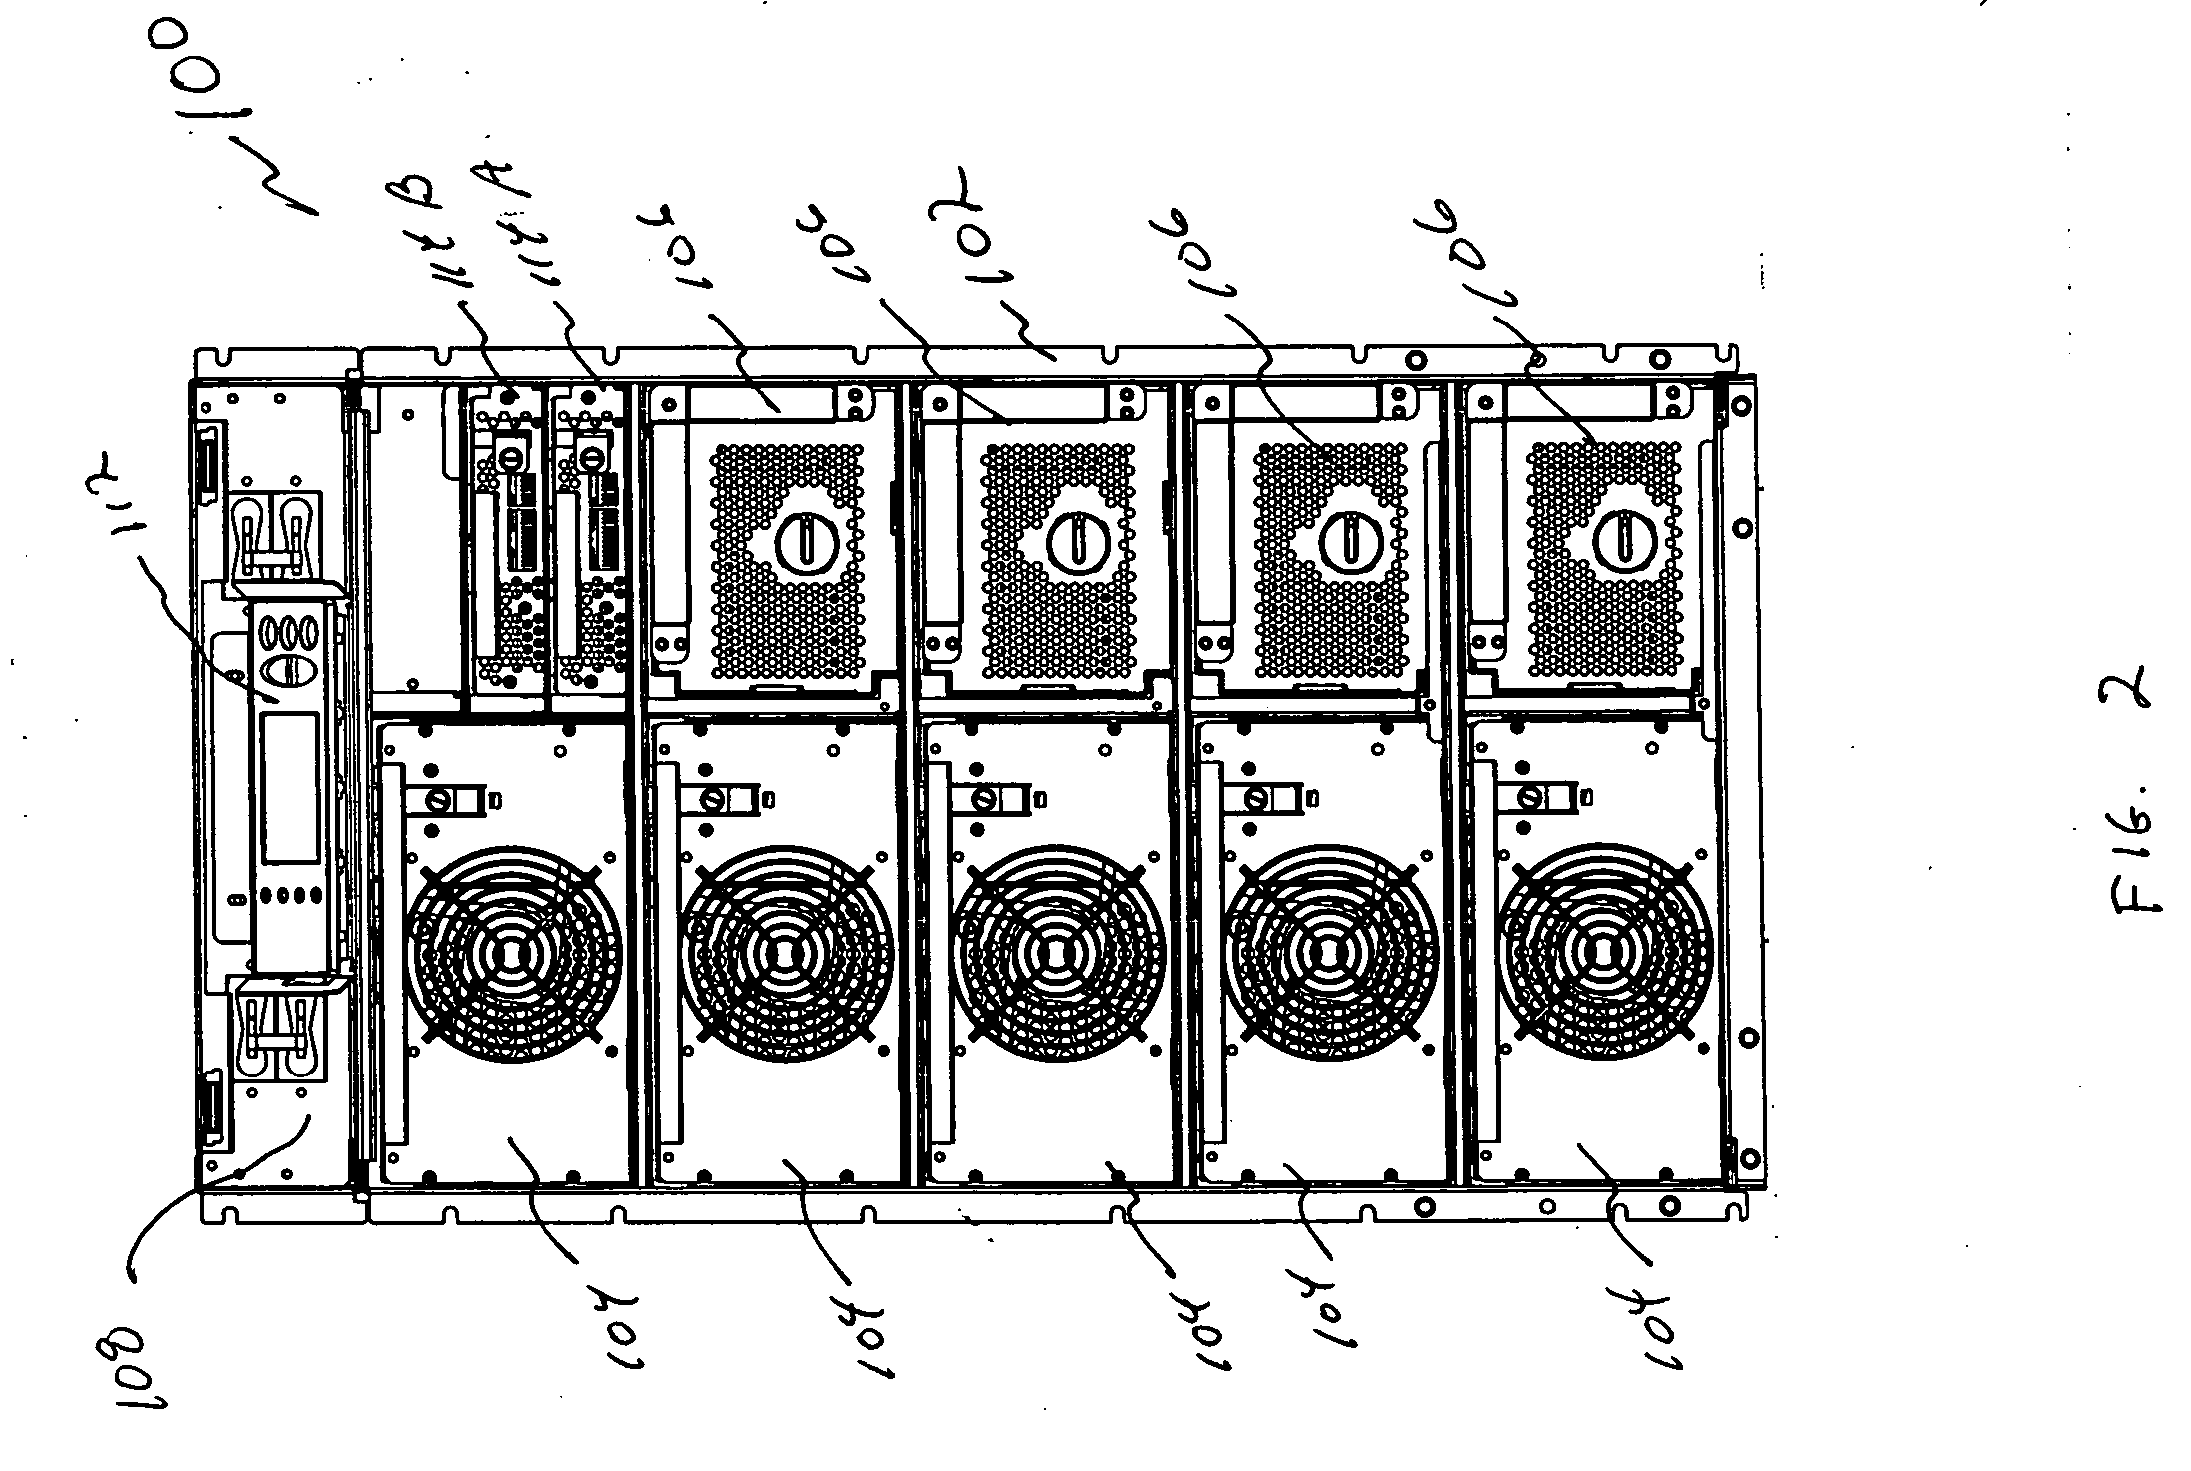 Methods and apparatus for providing uninterruptible power